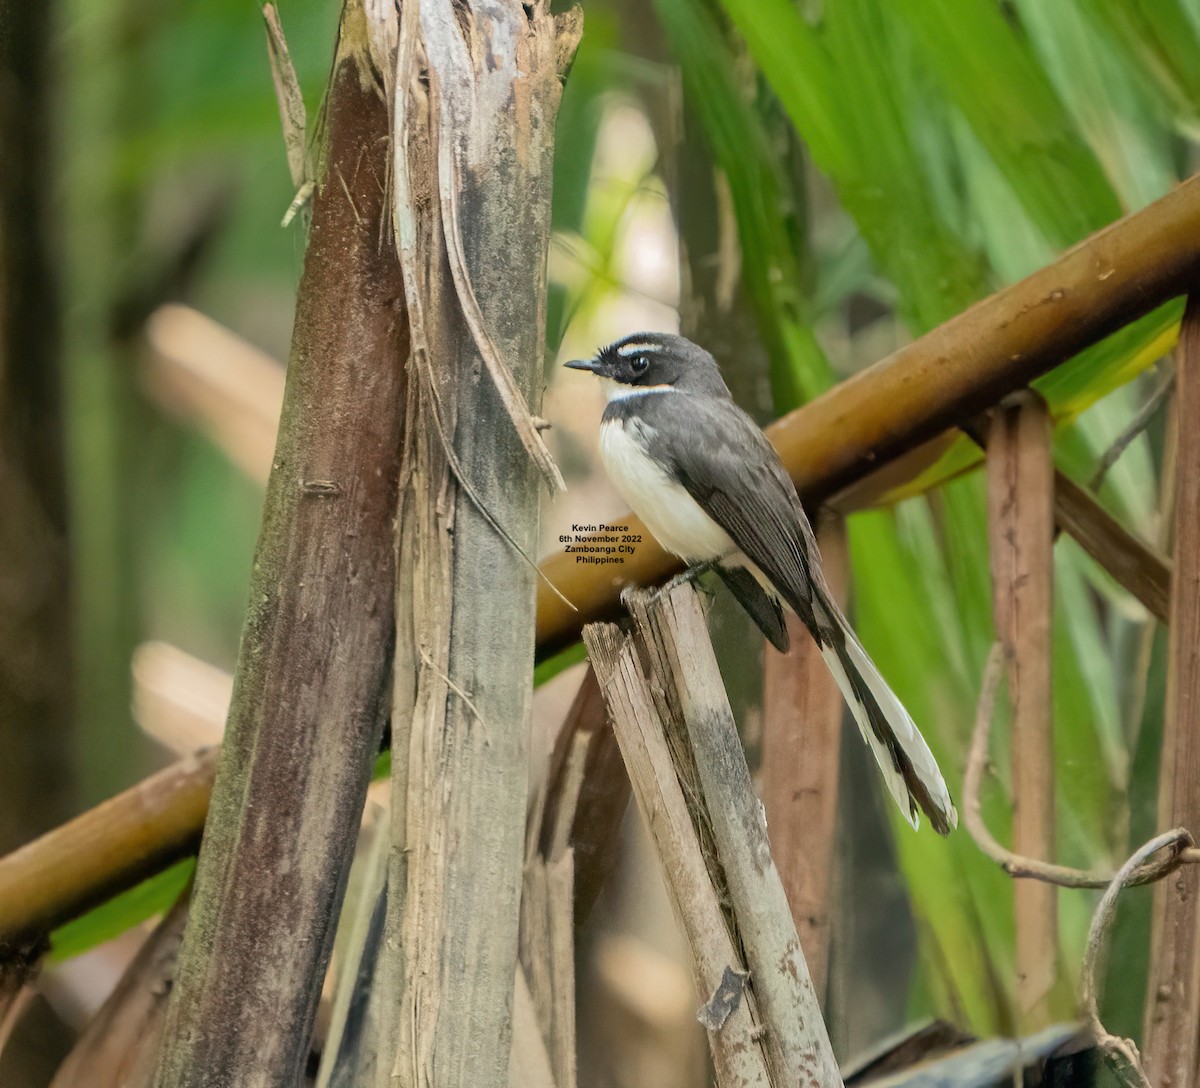 Philippine Pied-Fantail - Kevin Pearce